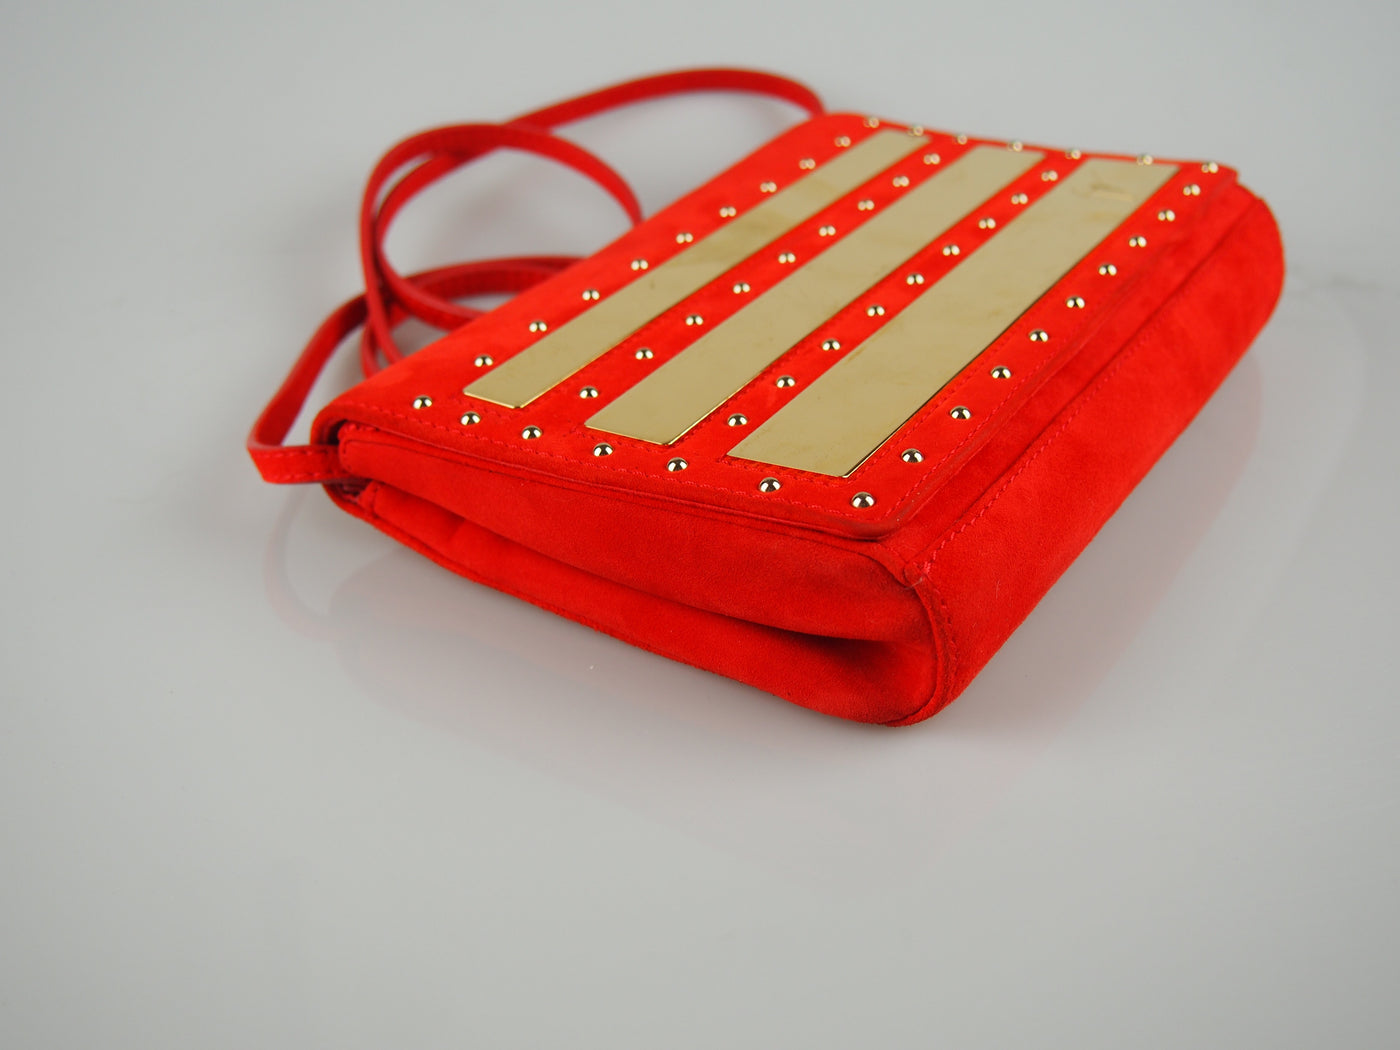 Red suede studded clutch